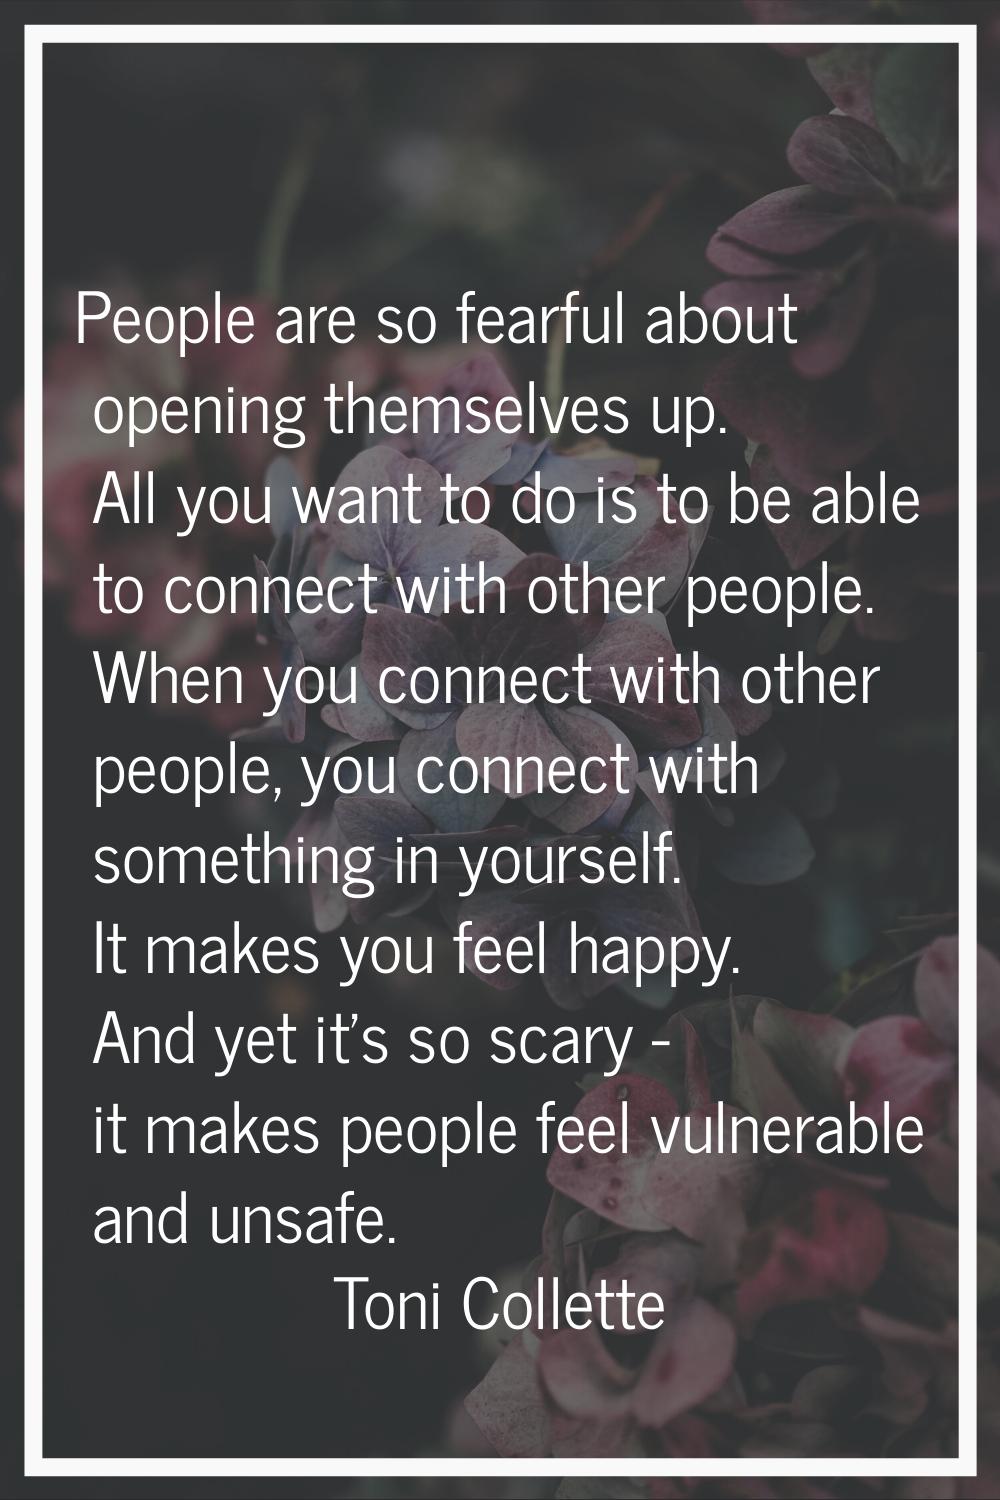 People are so fearful about opening themselves up. All you want to do is to be able to connect with